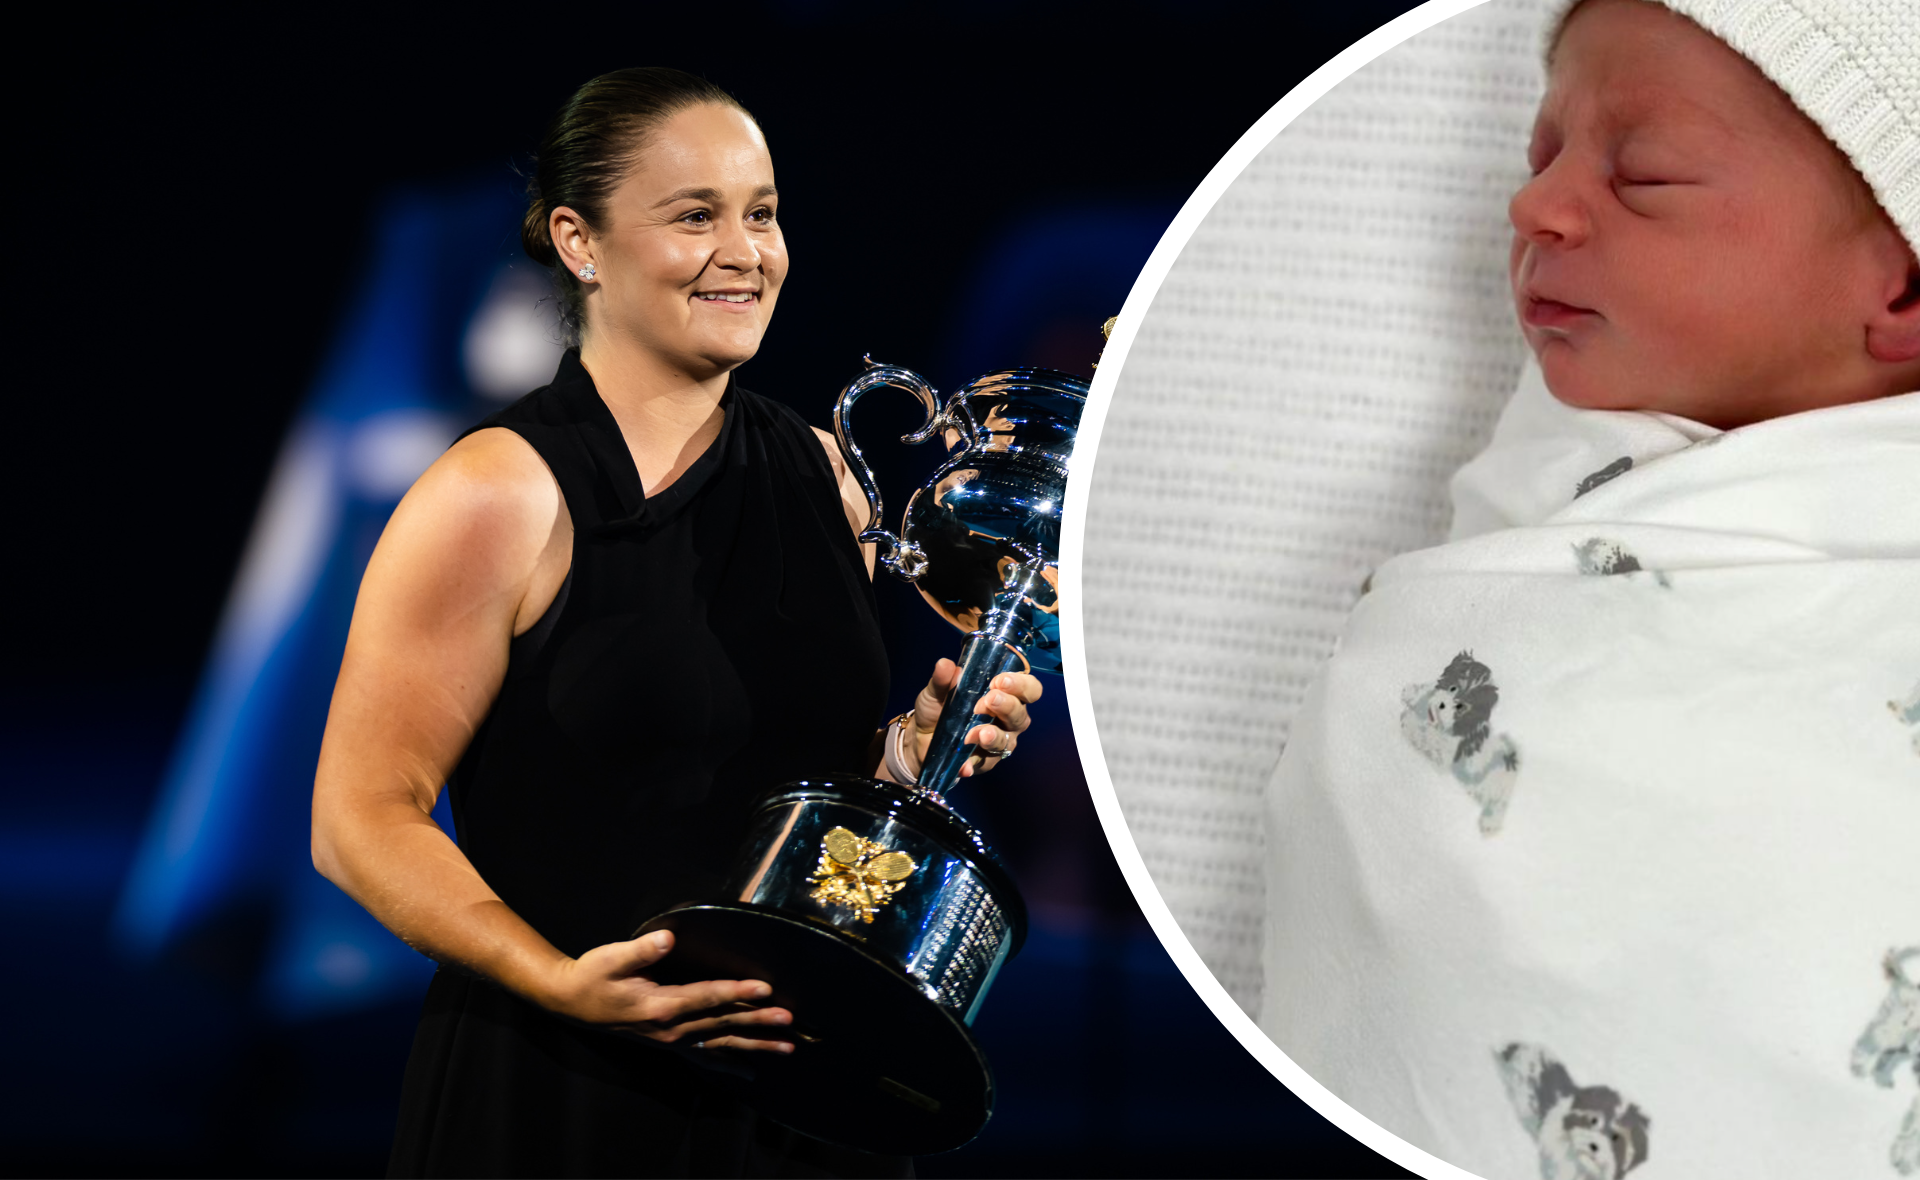 Tennis star Ash Barty announces the arrival of her first child